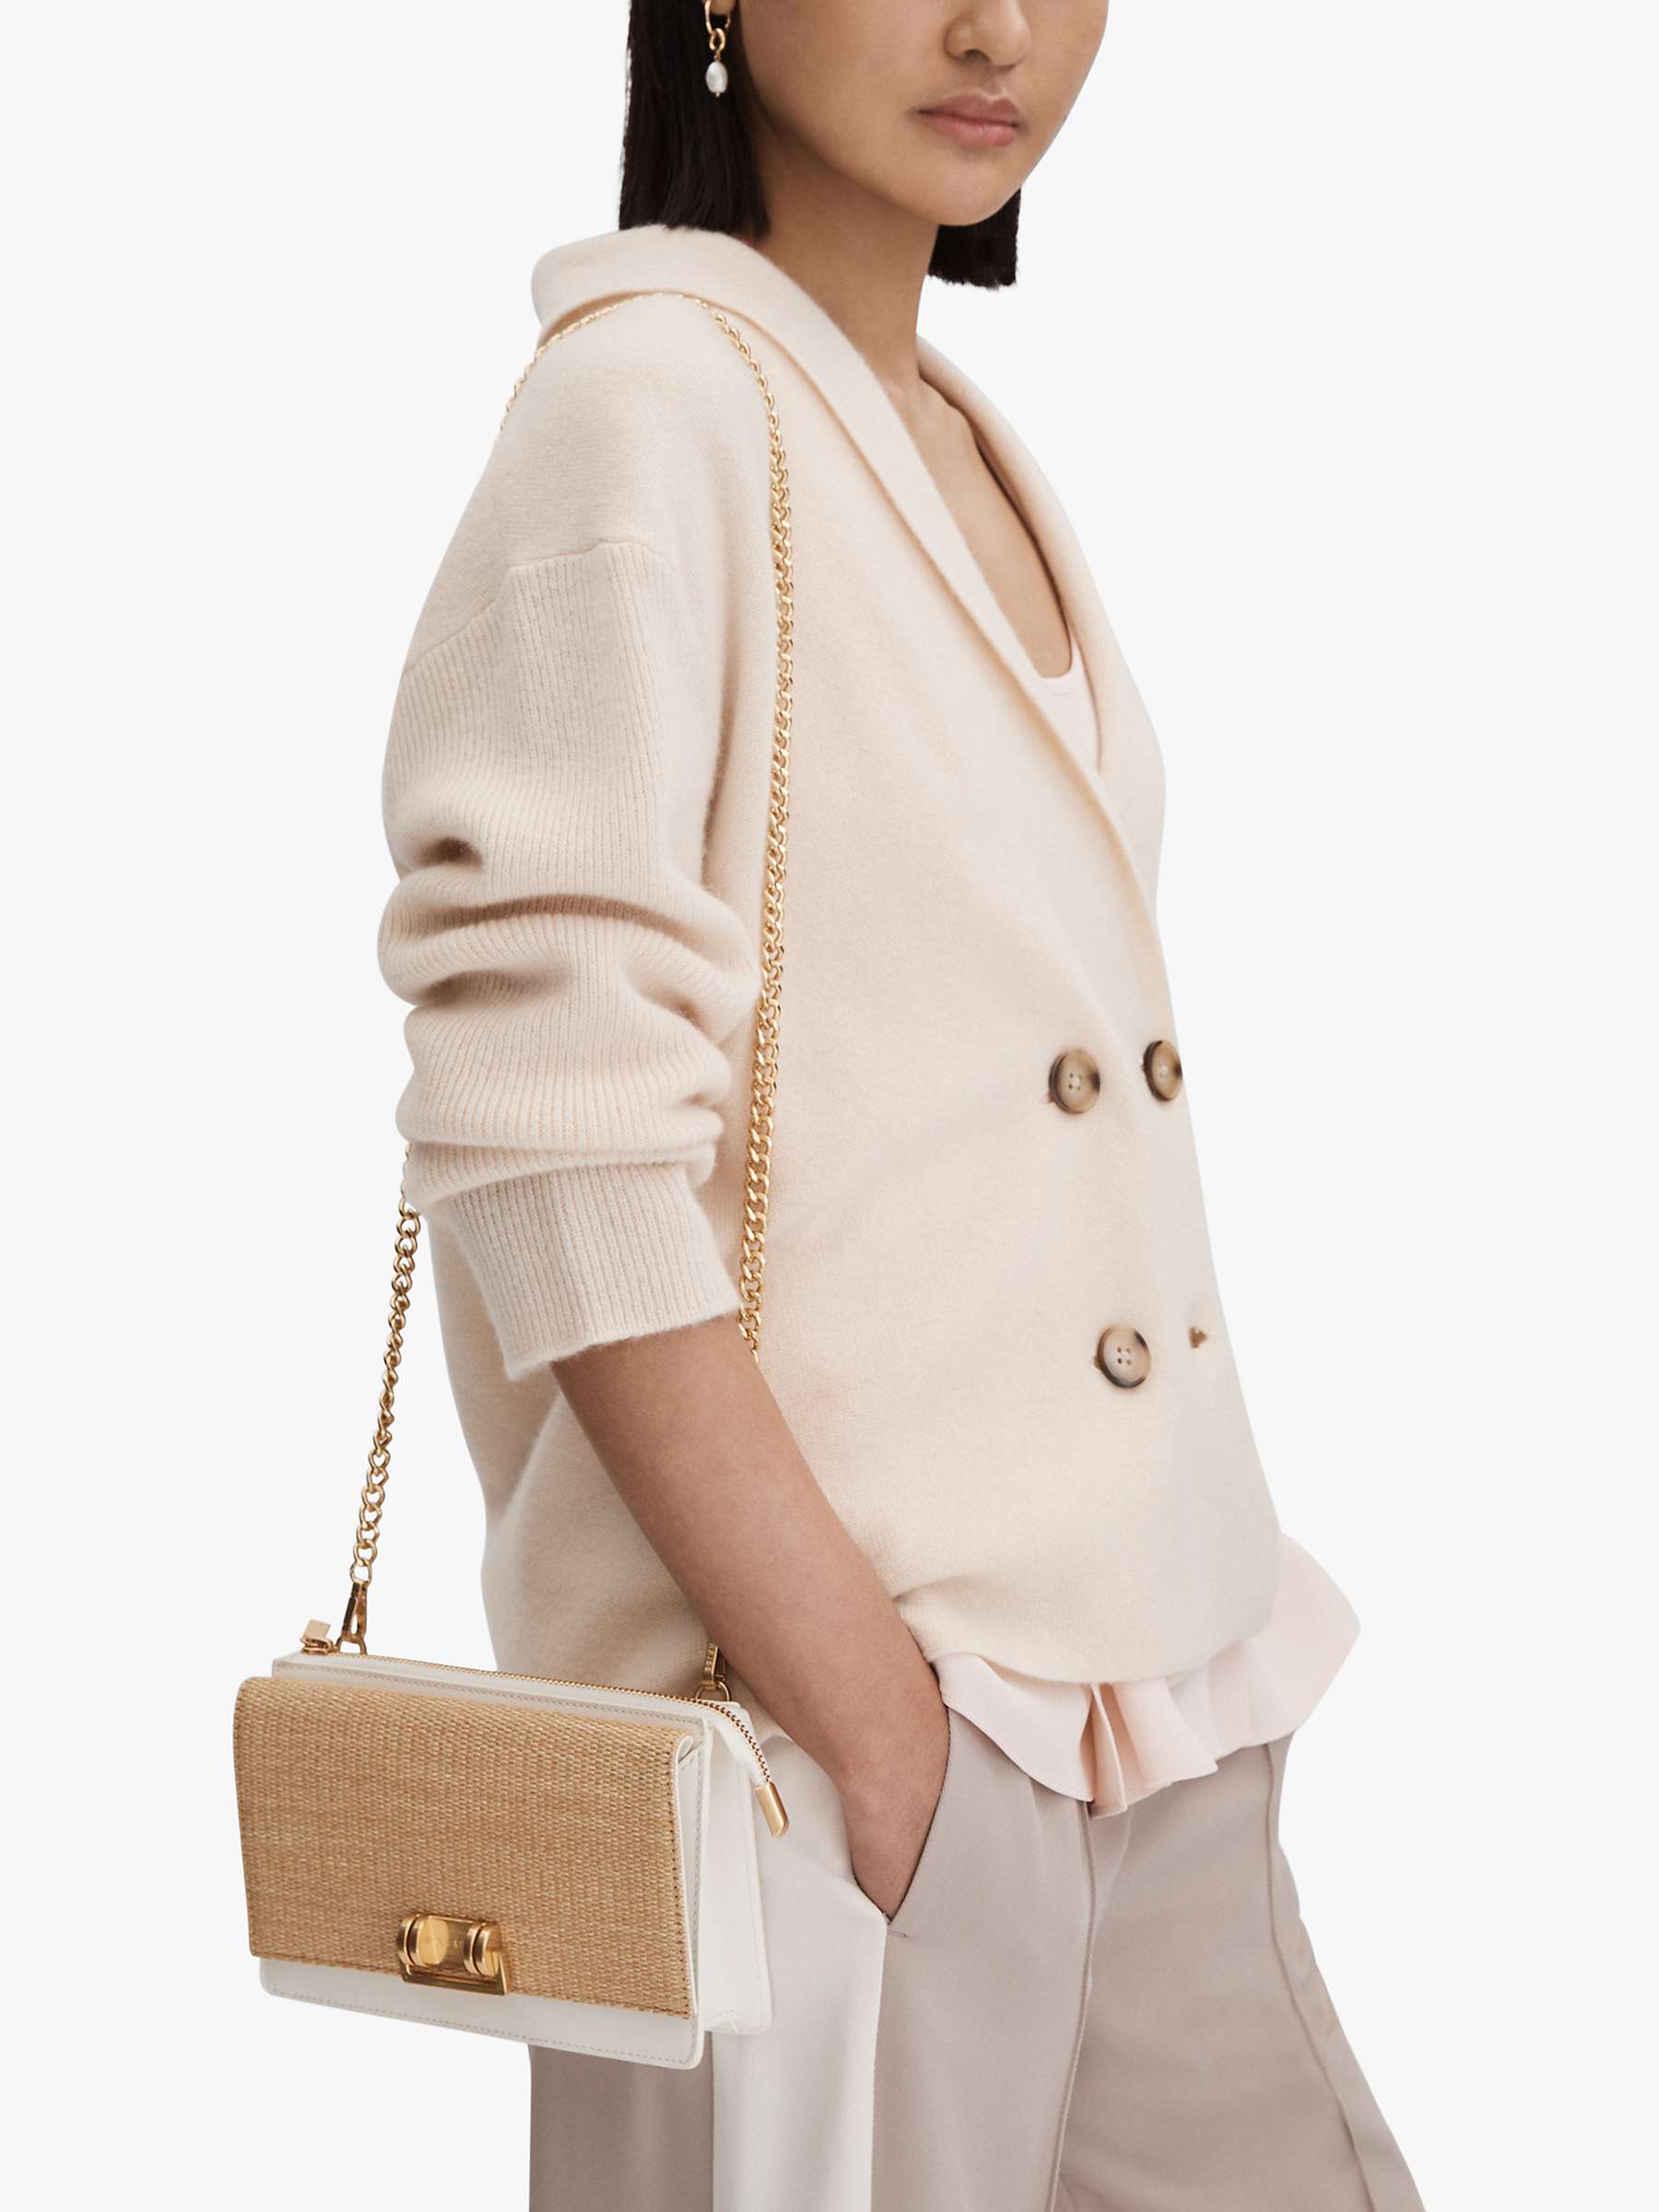 Buy Reiss Picton Leather & Raffia Chain Strap Crossbody Bag, White/Natural Online at johnlewis.com